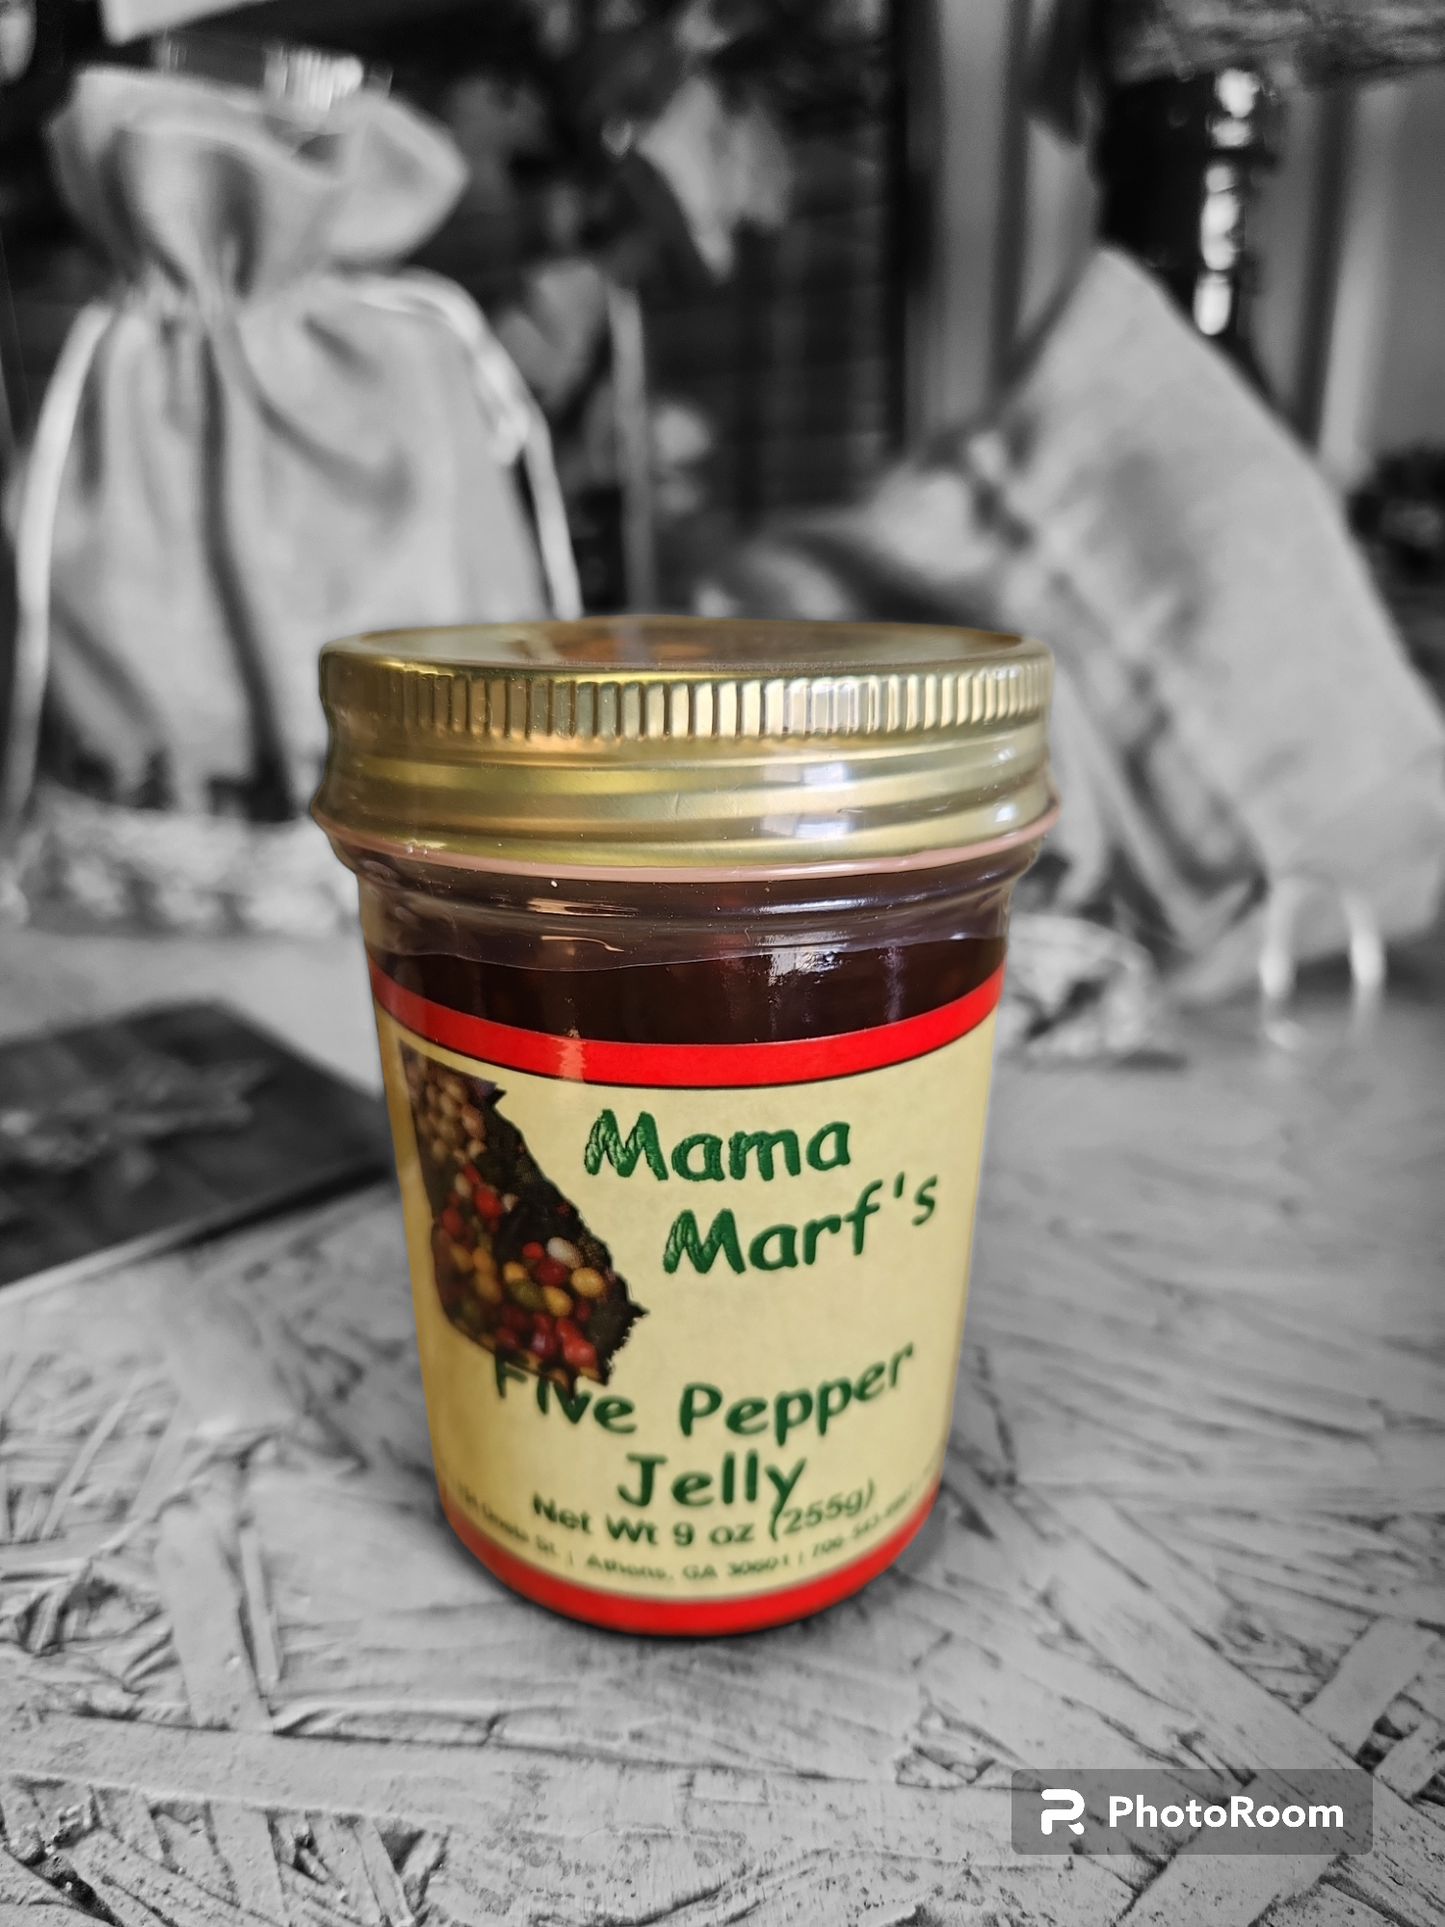 Mama Marf"s Five Pepper Jelly